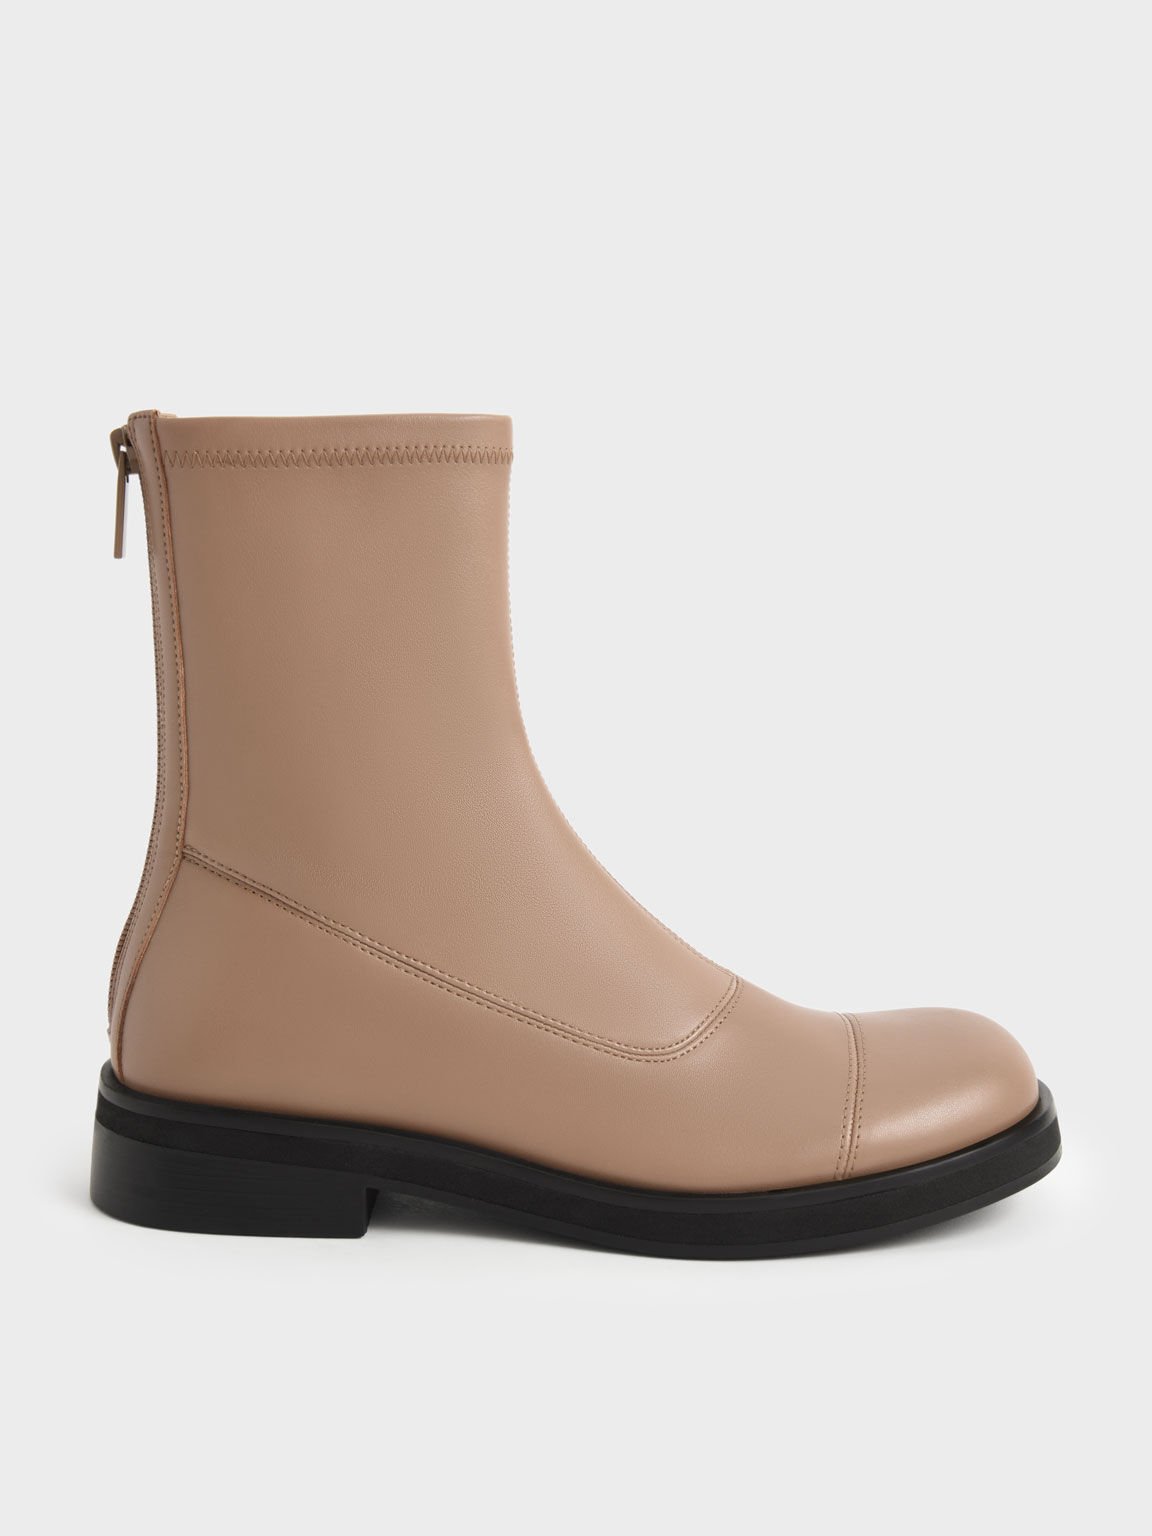 Round Toe Zip-Up Ankle Boots, Camel, hi-res